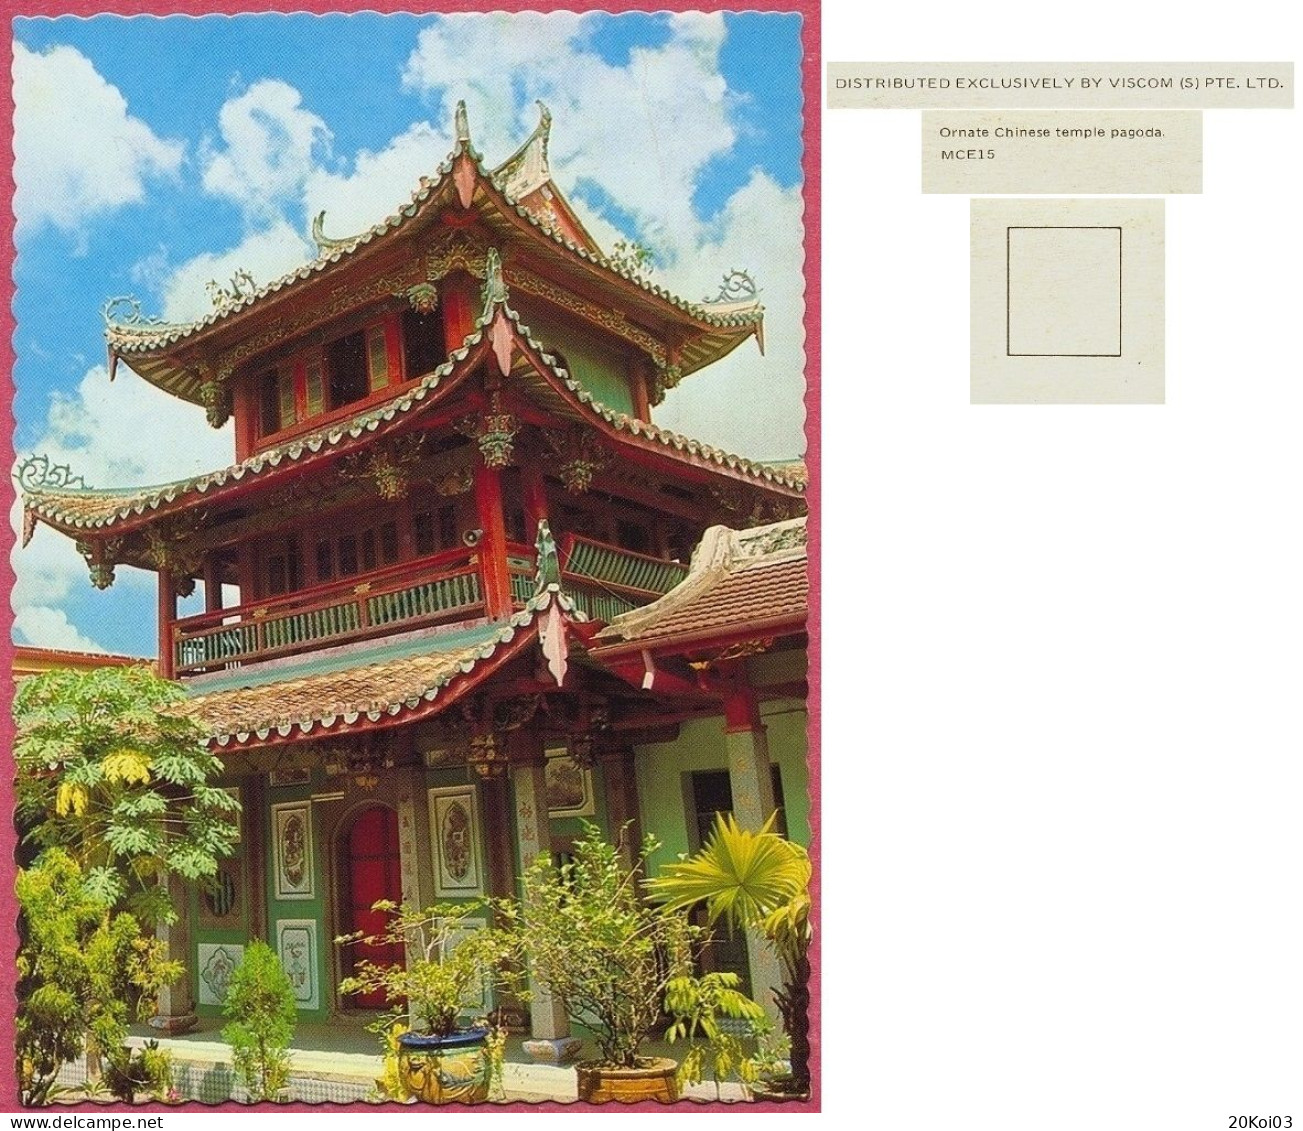 Singapore Ornate Chinese Temple Pagoda 1978's MCE15 DISTRIBUTED EXCLUSIVELY BY VISCOM (S) PTE. LTD. Vintage_cpc - Singapur